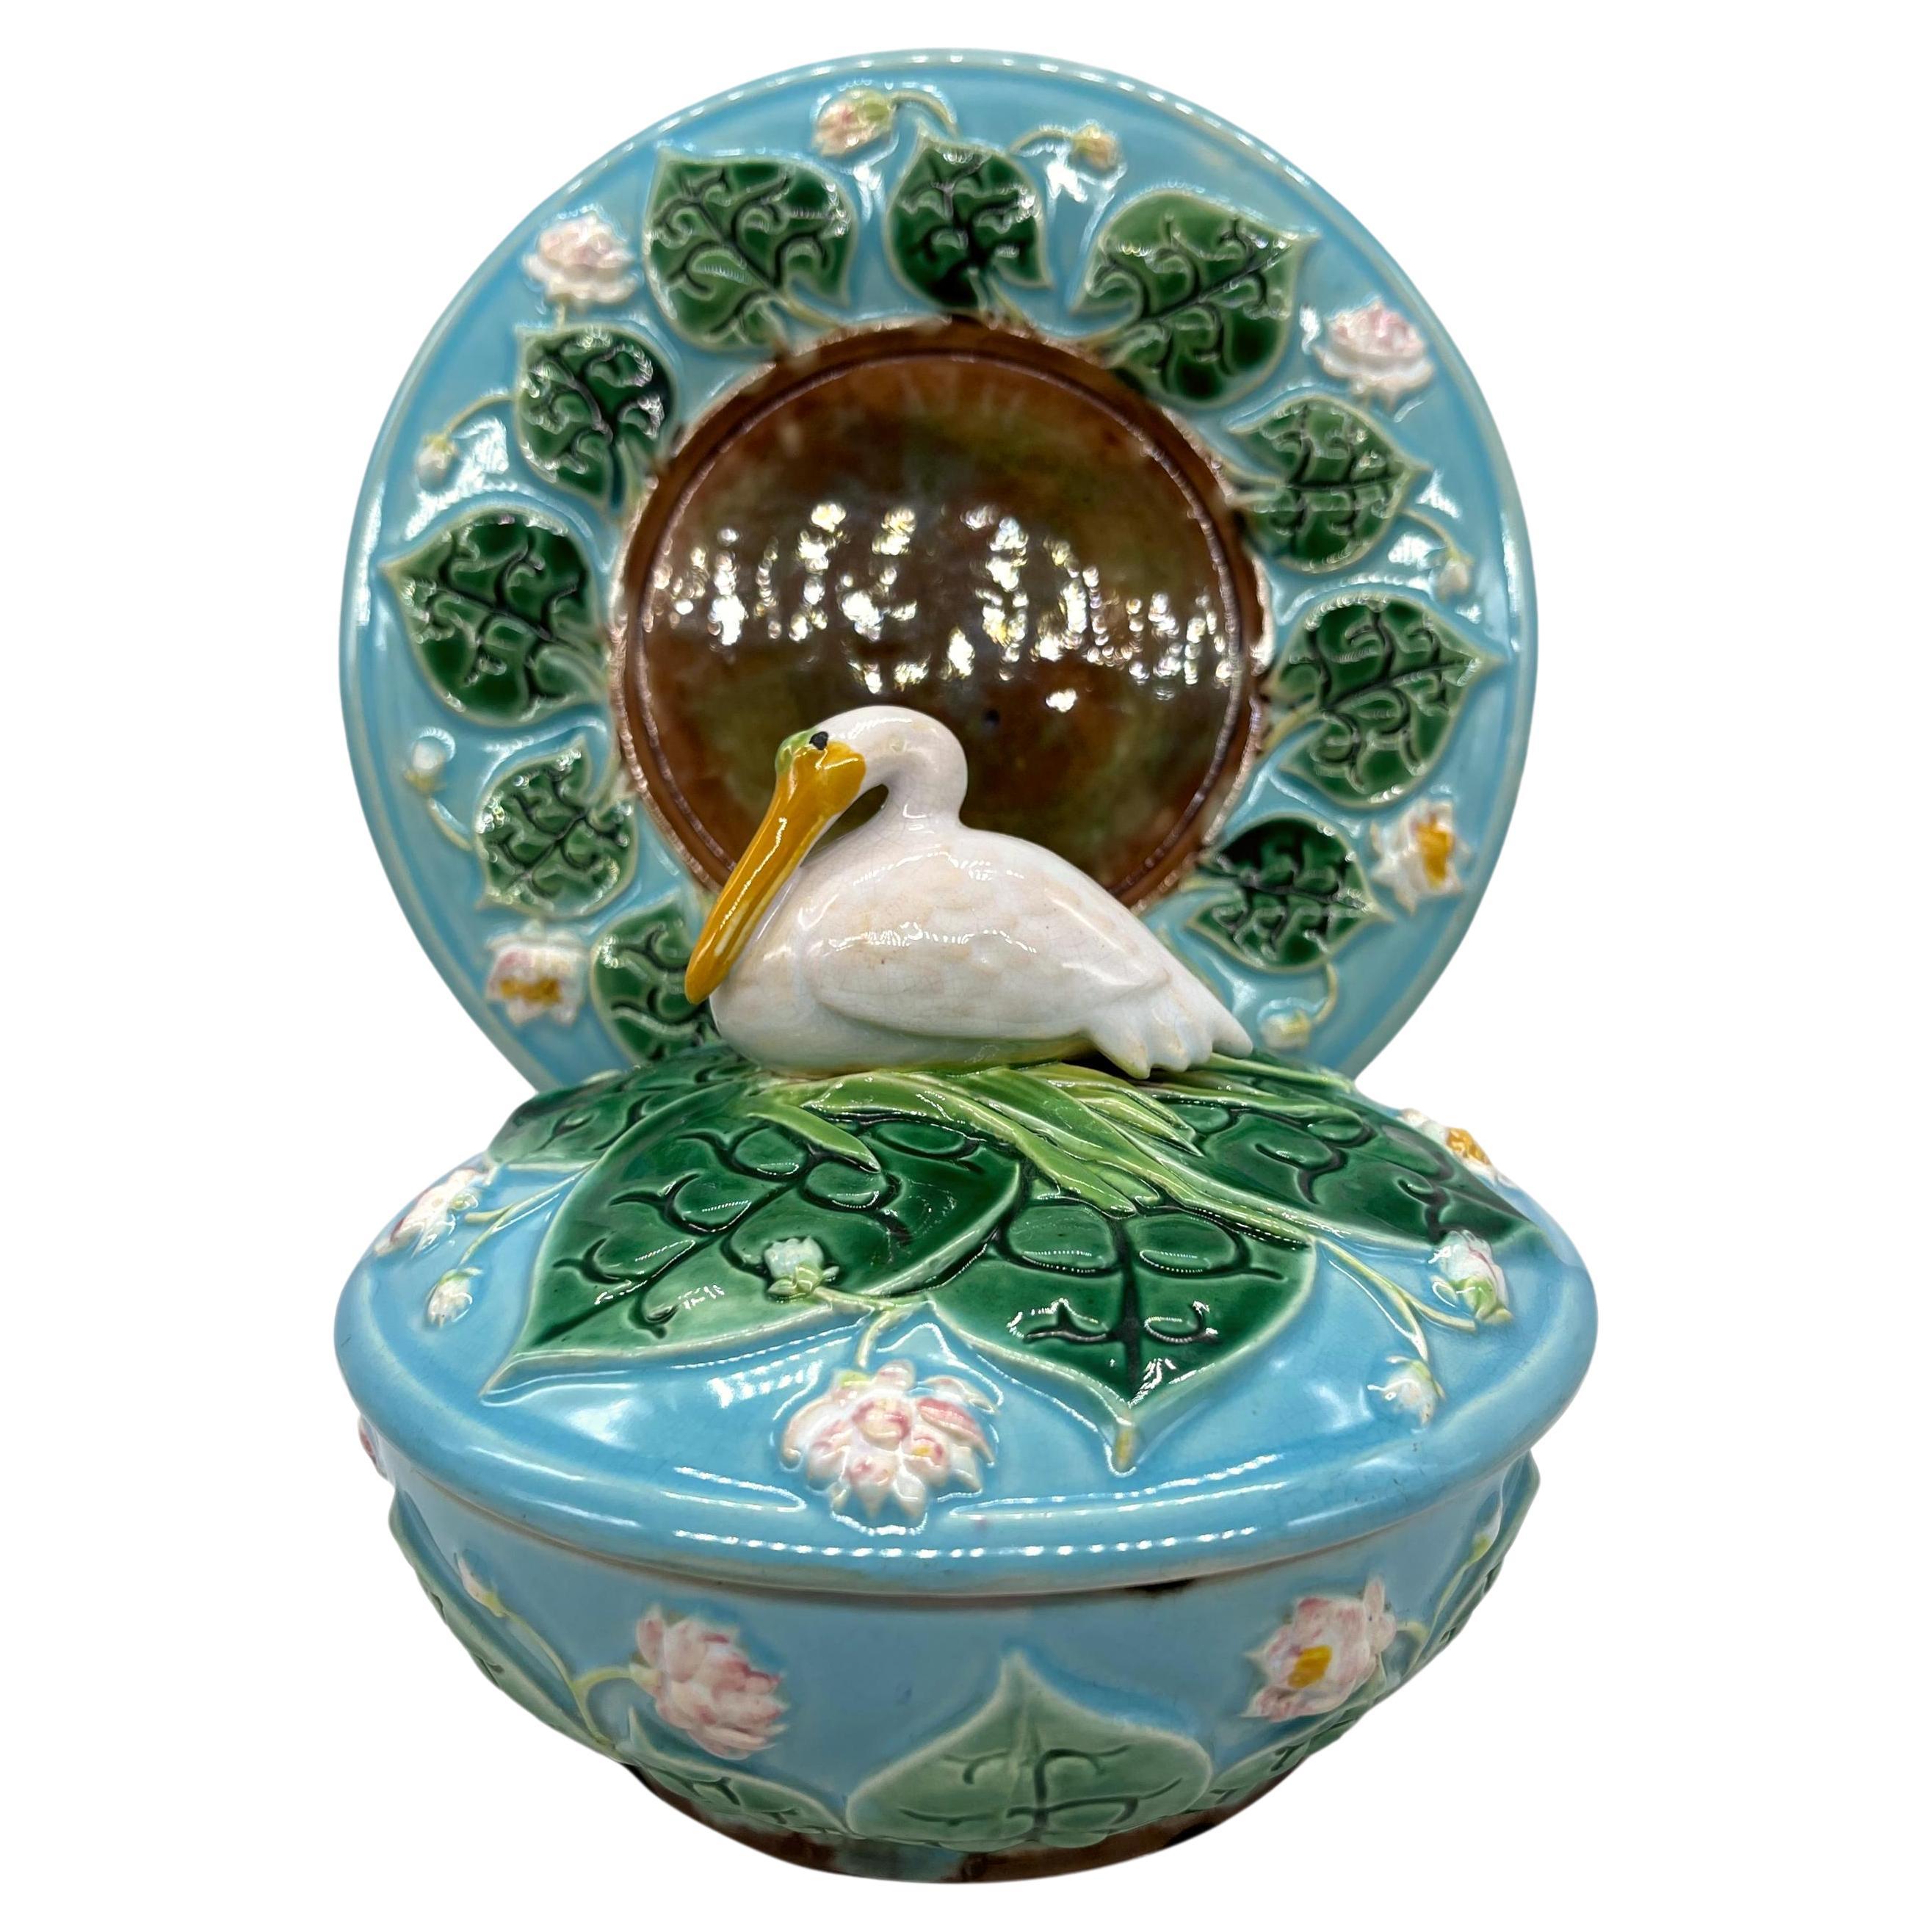 George Jones Majolica Pâté Server with Stand & Cover, English, Dated 1875.
The three pieces modleld as a turquoise glazed pond with relief-molded lily pads and flowering pond lilies, the server and cover interiors glazed in lilac, the stand with